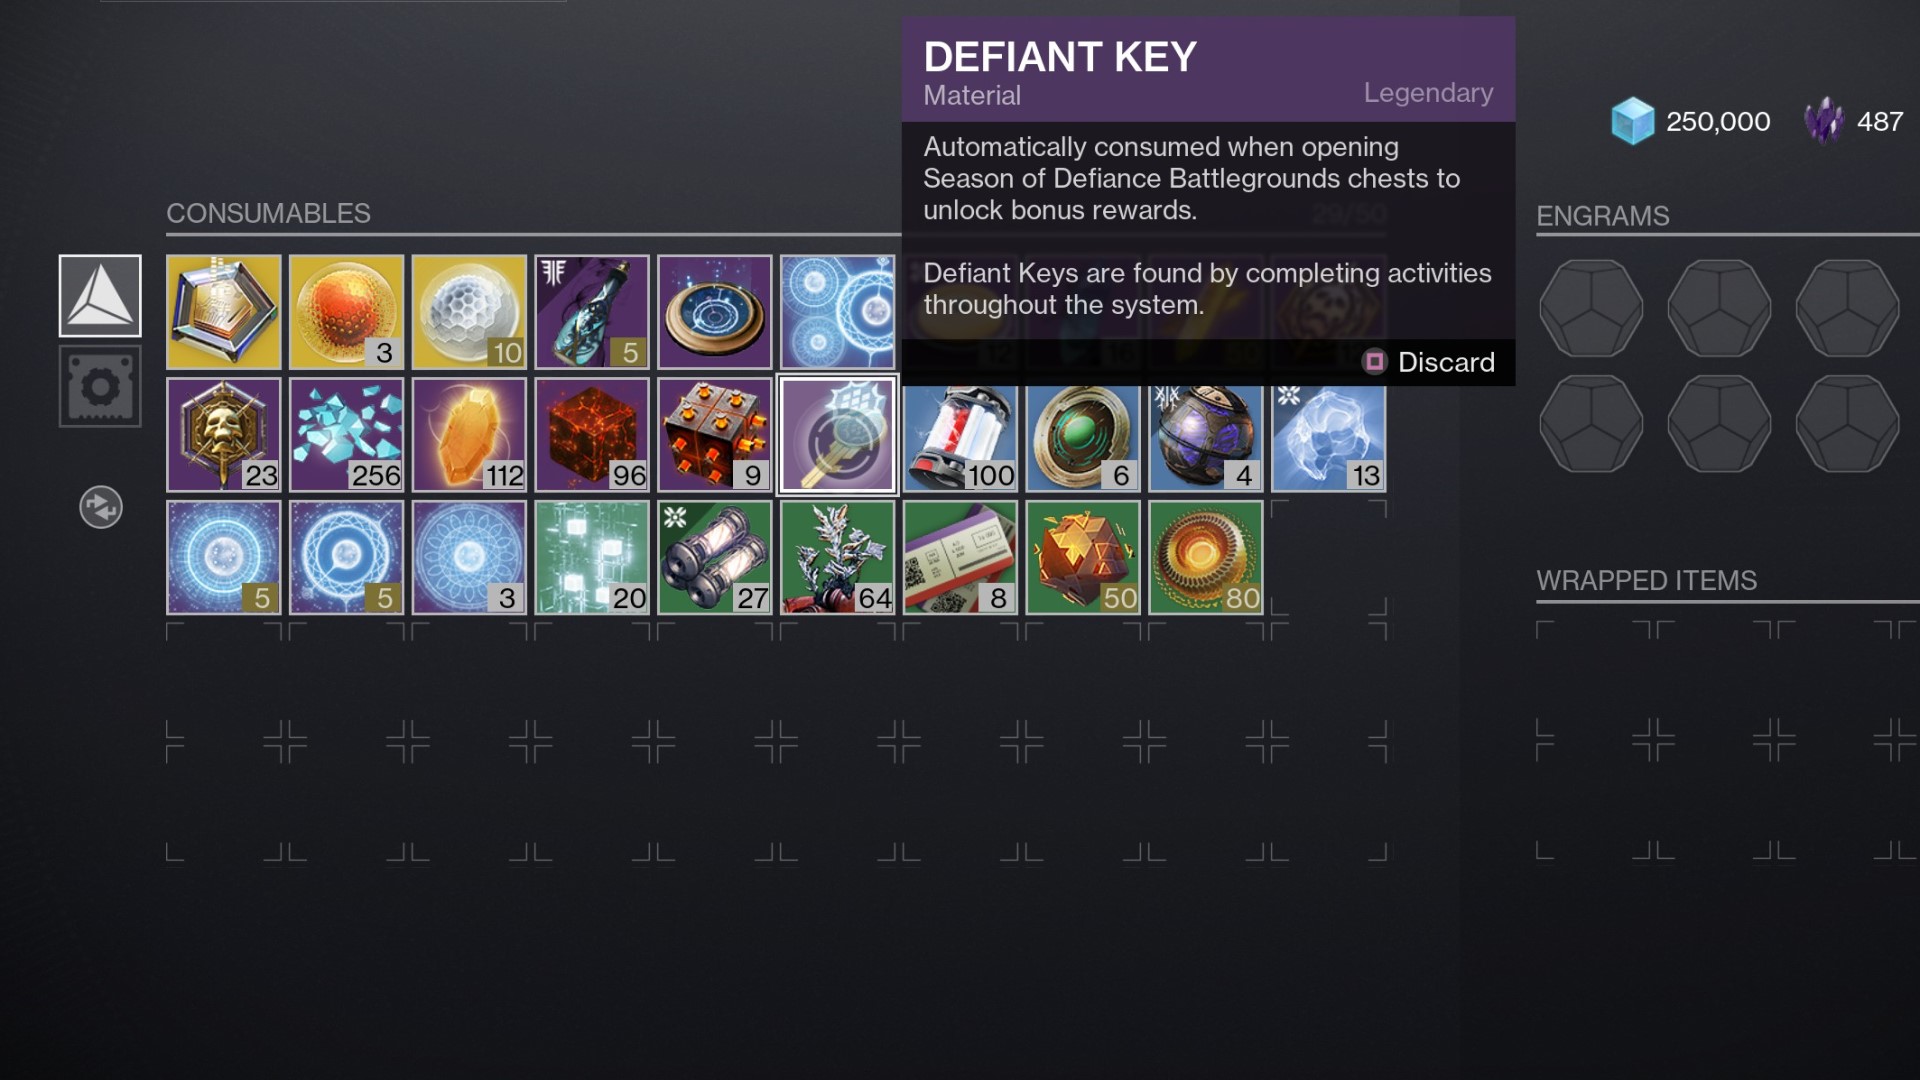 Destiny 2 Defiant Key in inventory